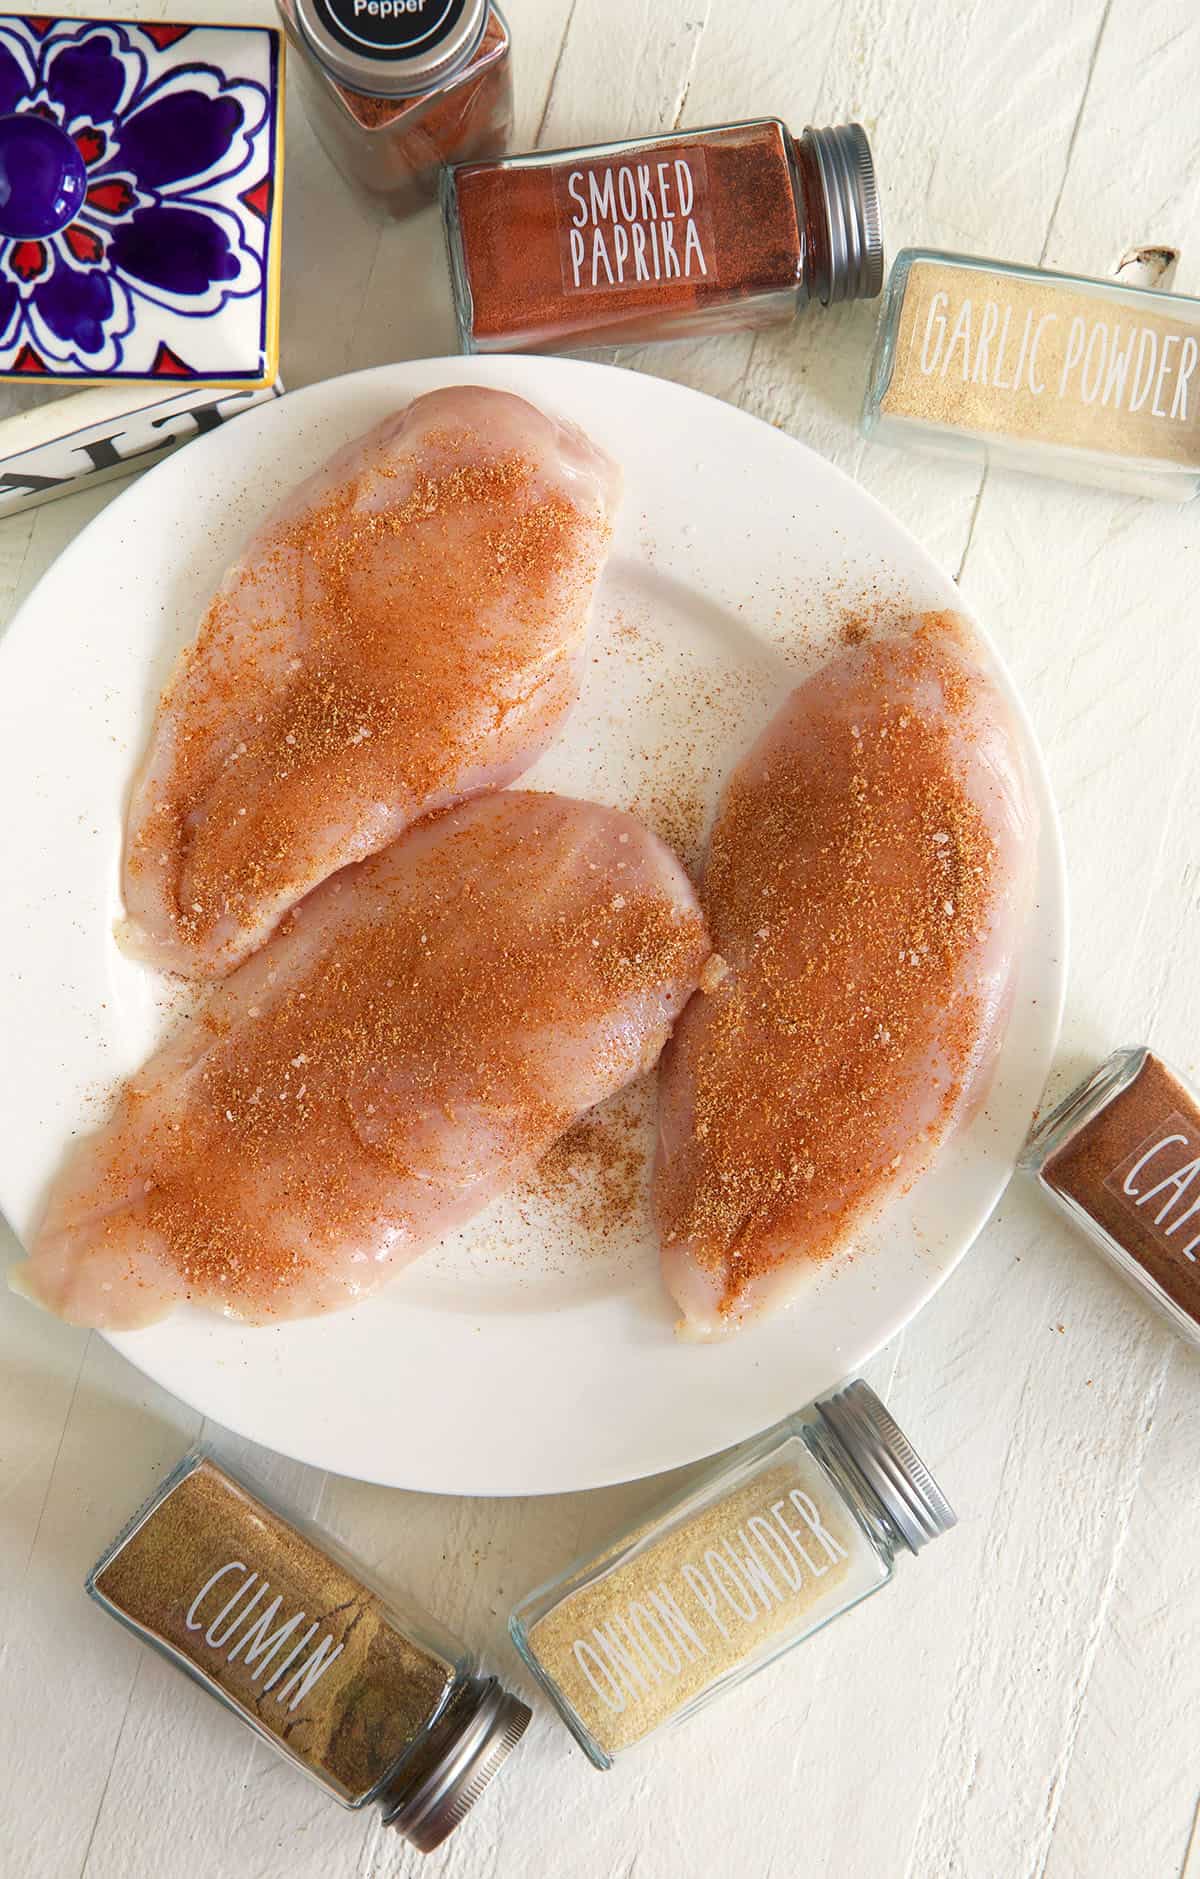 Three chicken breasts are placed on a white plate.